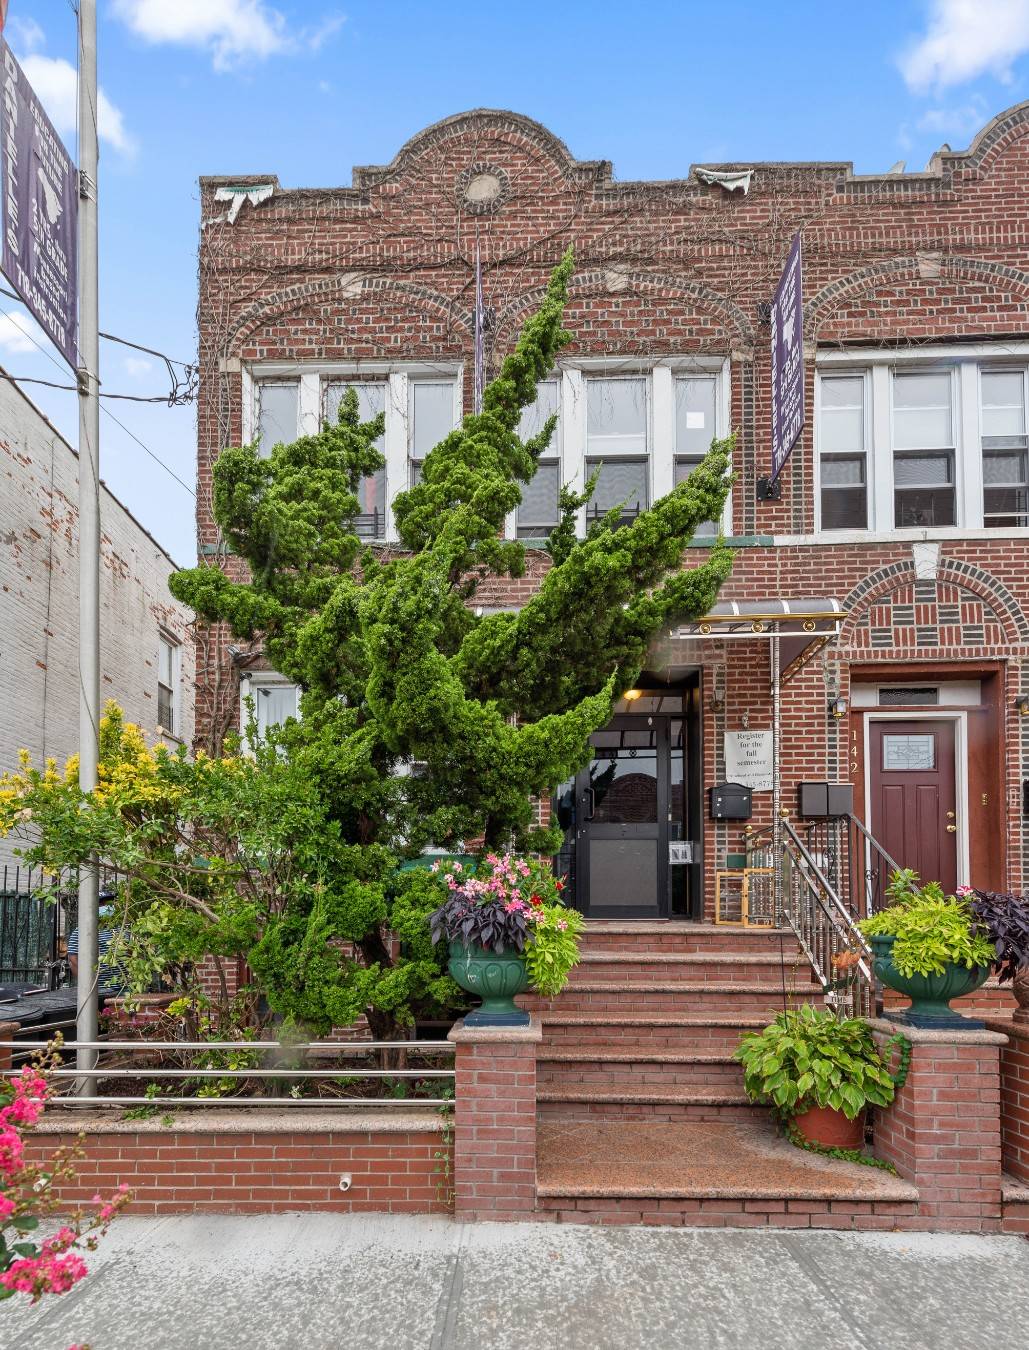 Unique opportunity to own a mint condition legal 3 family in East Flatbush with shared driveway.